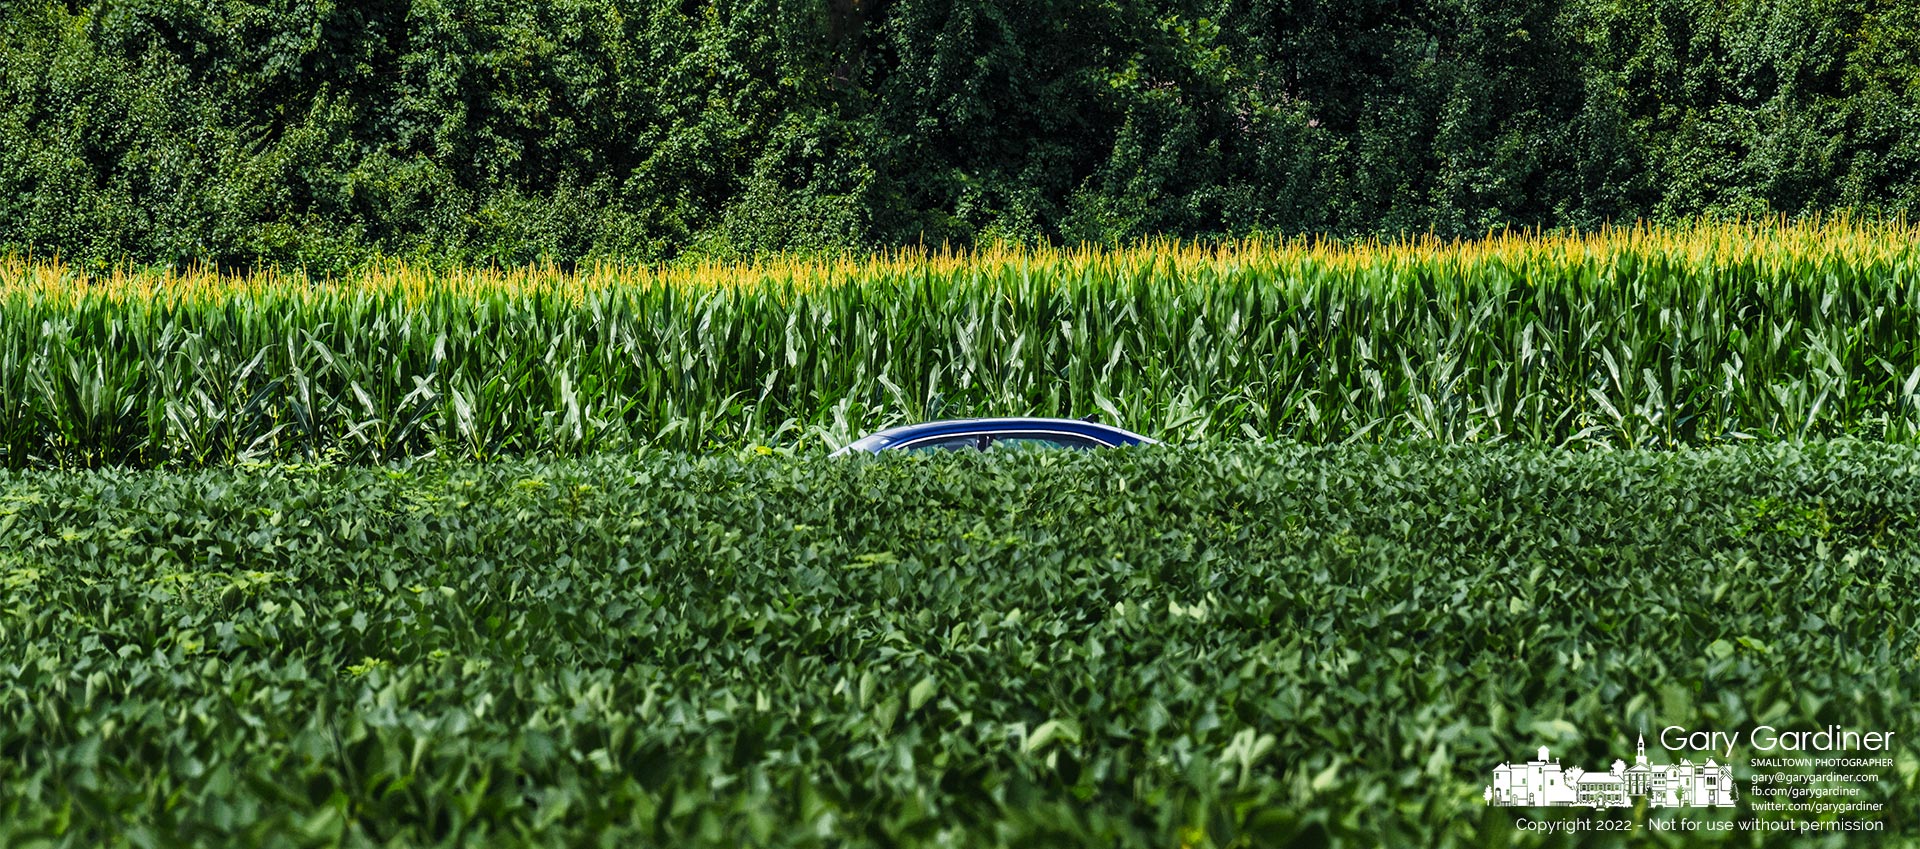 A car is barely visible between fields of soybeans and corn as warm temperatures and recent rains have accelerated the growth of both fields along Cooper Road.  My Final Photo for July 25, 2022.